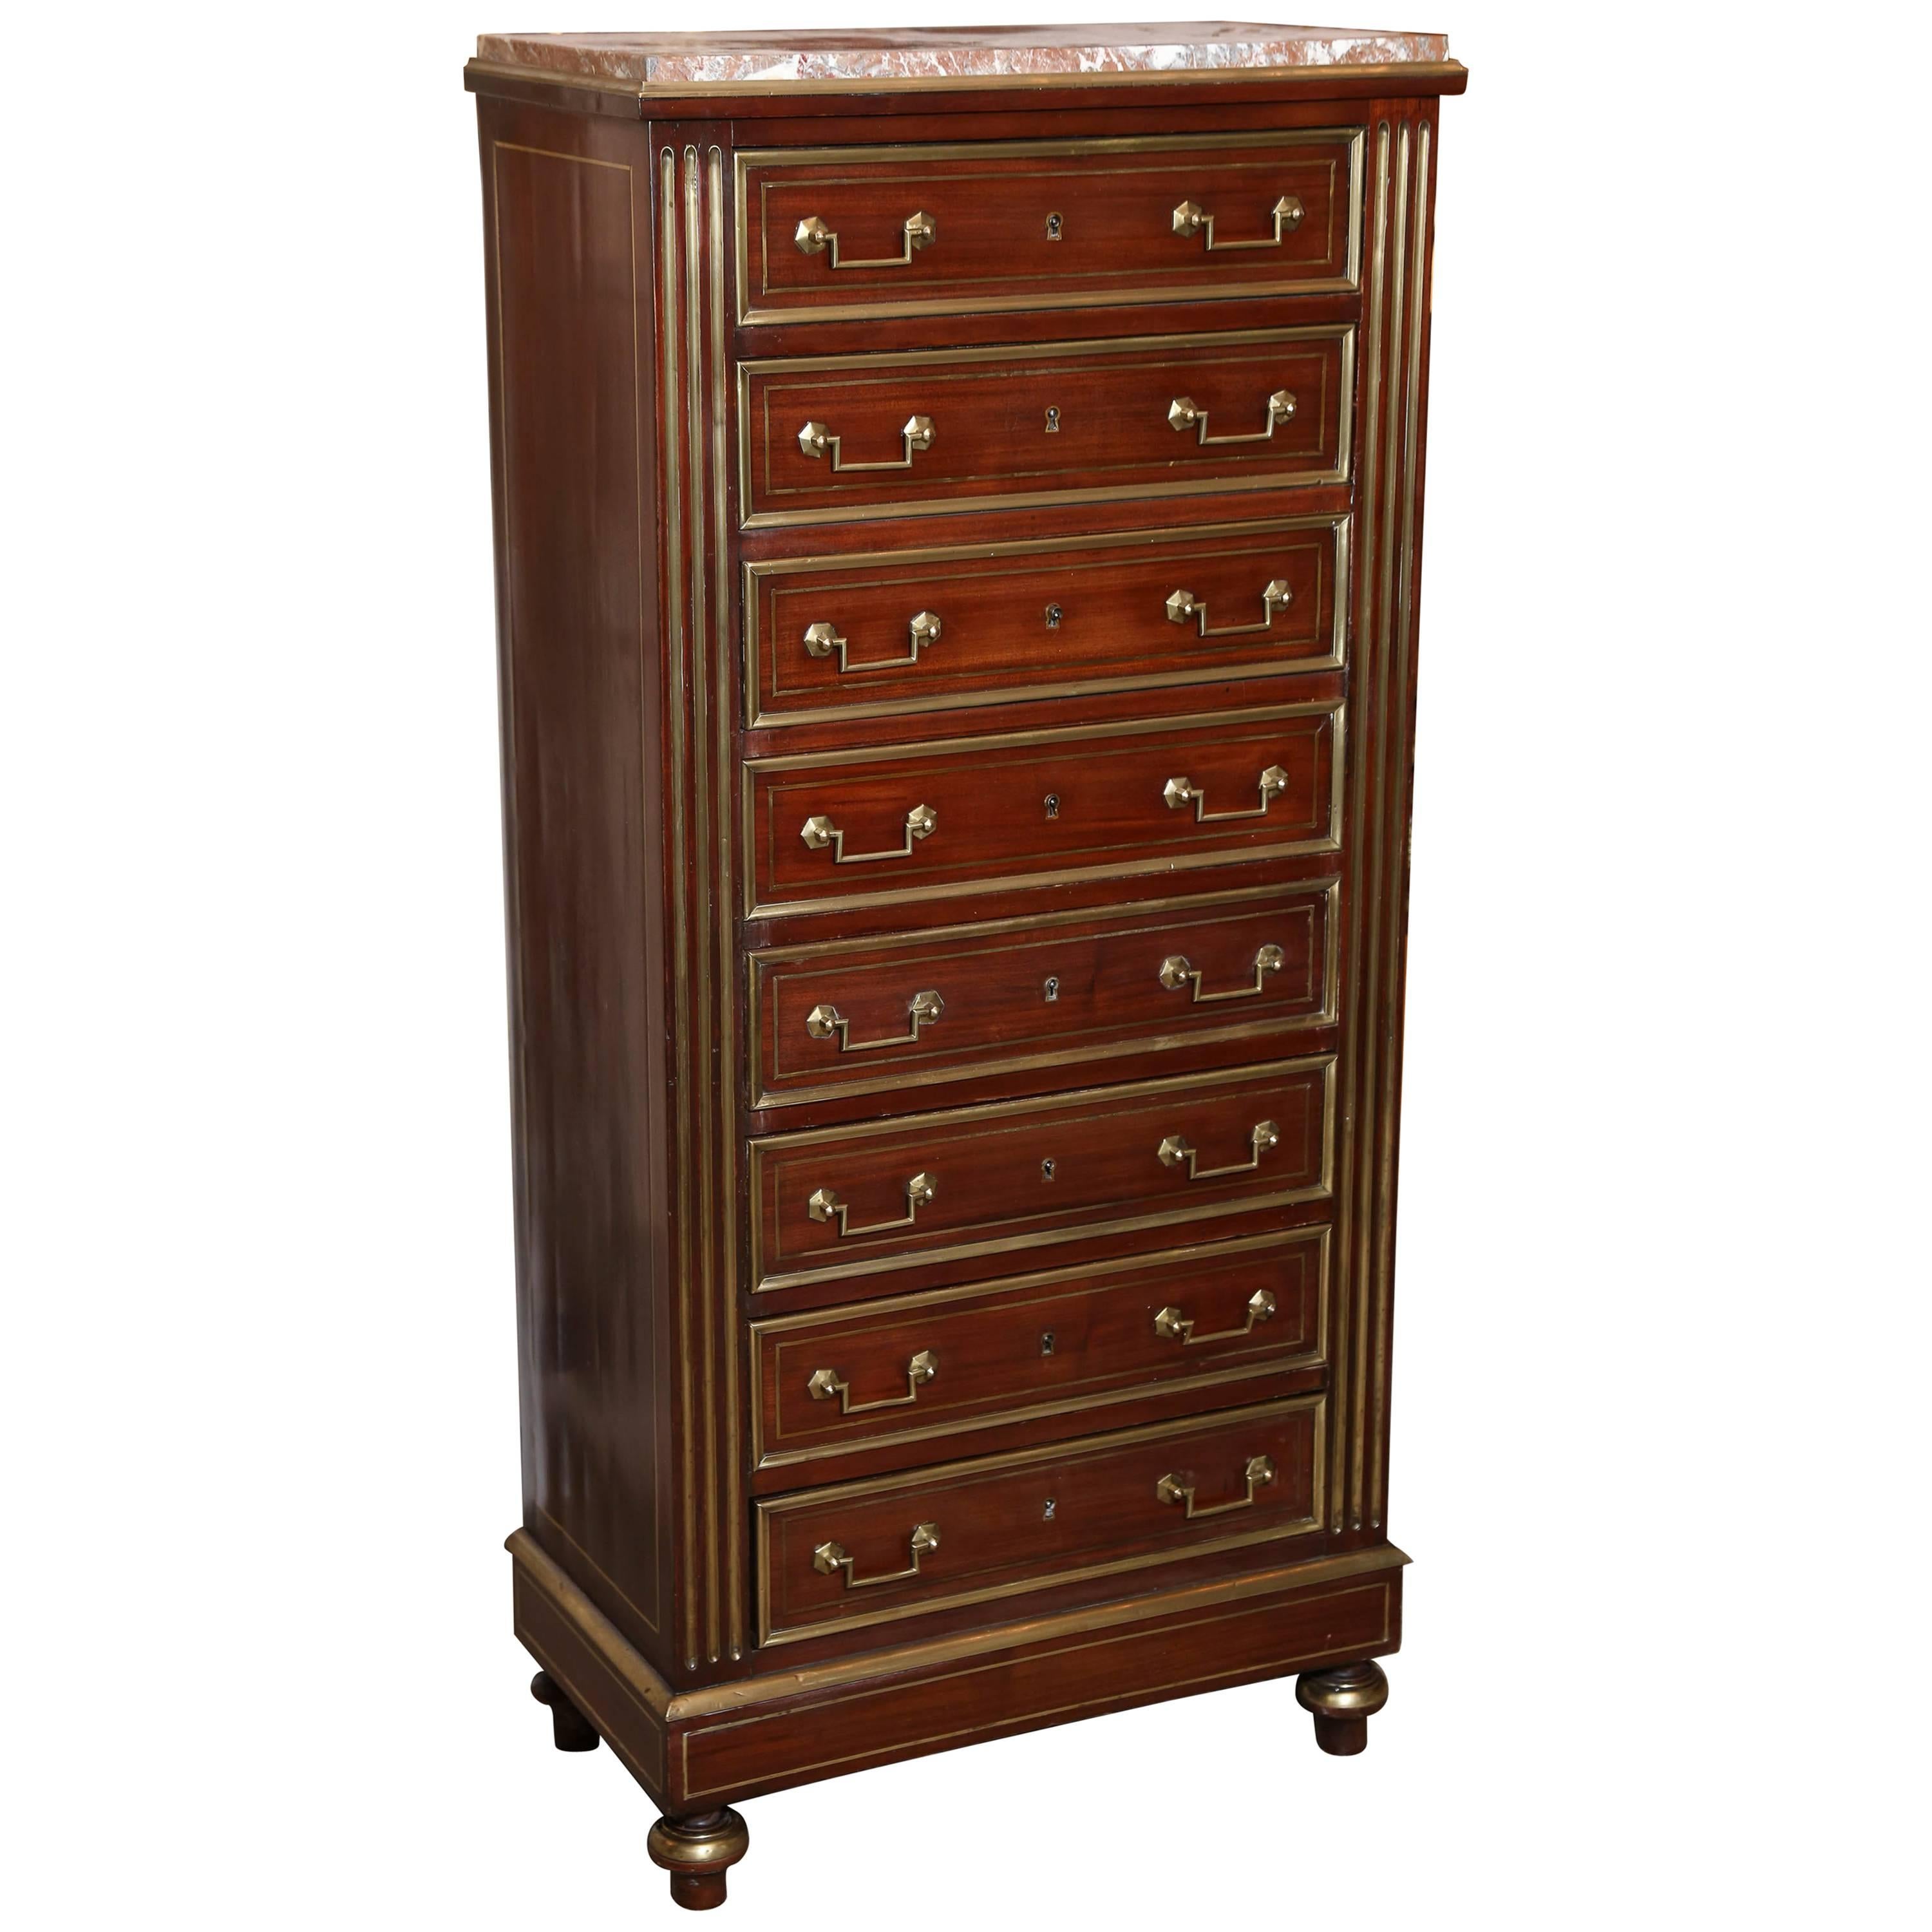 Louis XVI Style Mahogany Marble-Top Tall Chest, Early 20th Century